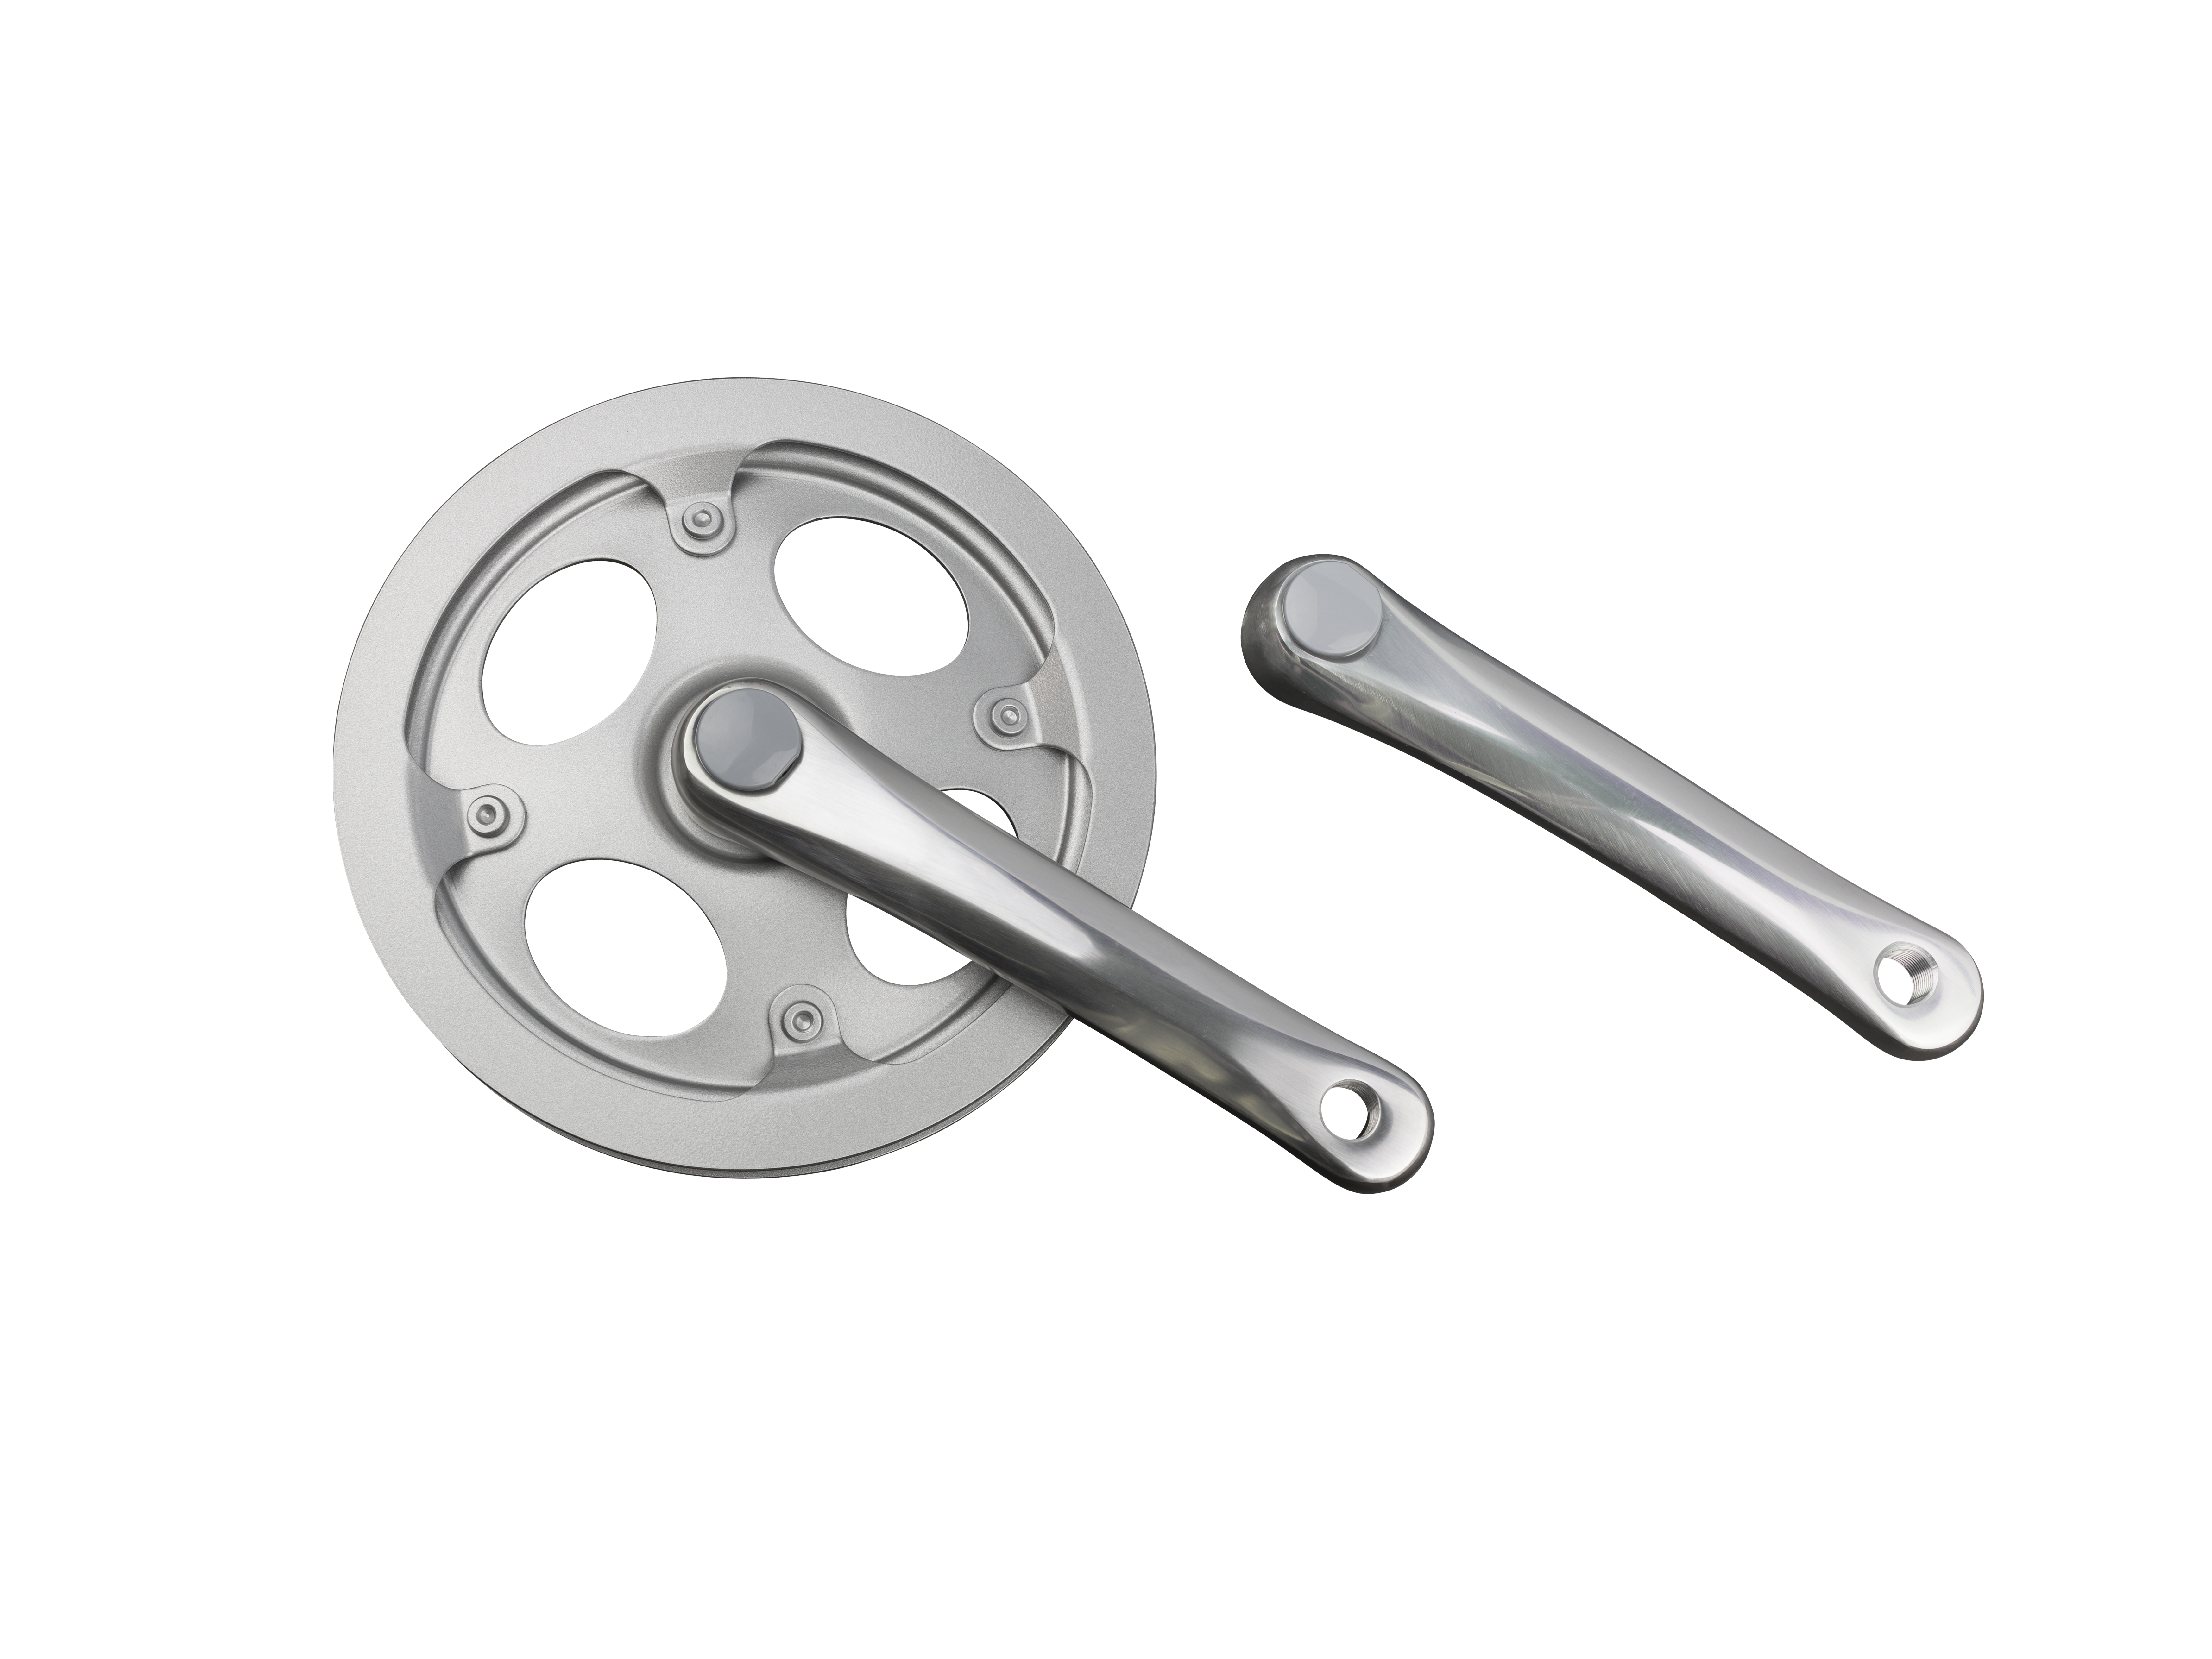 Crank Electra Townie w/Dual Guide 160mm Silver